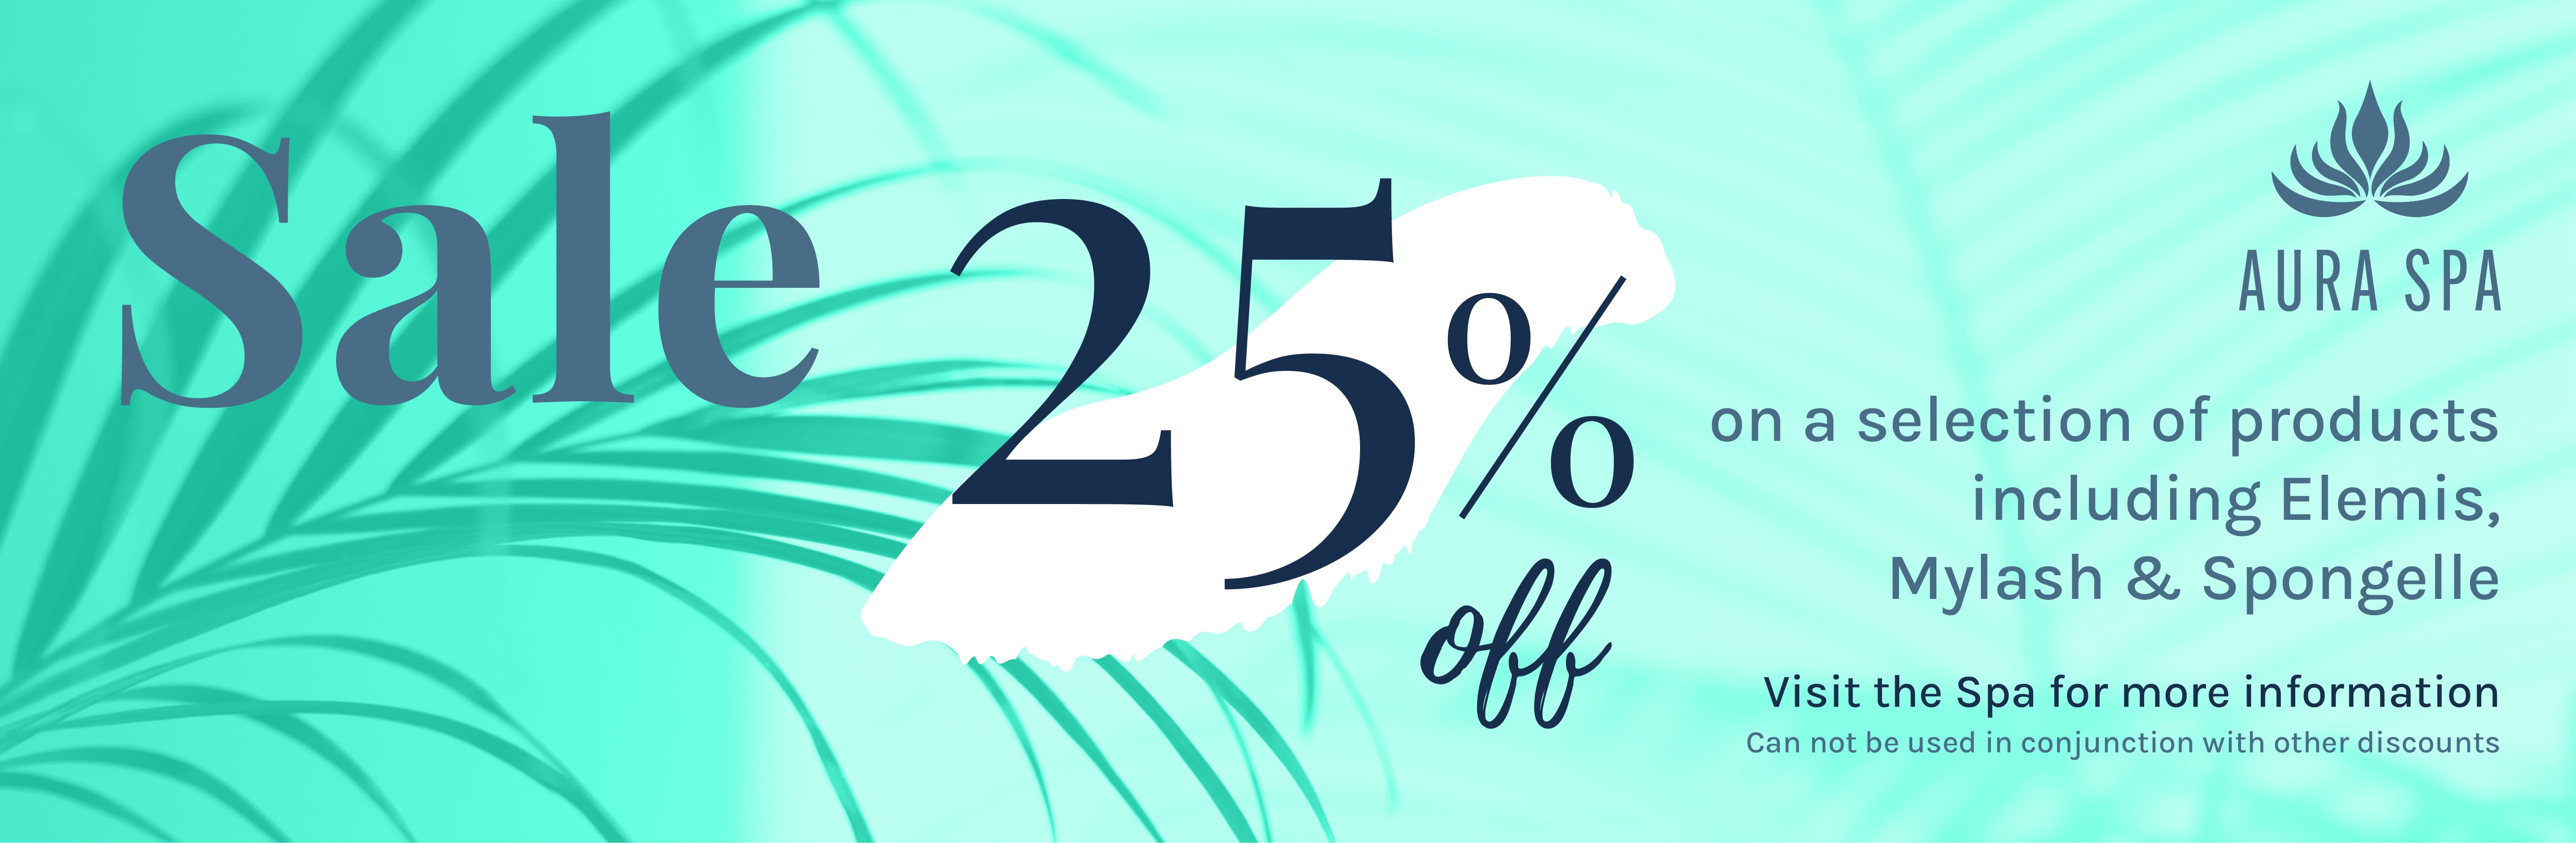 25% off Aura Spa products sale